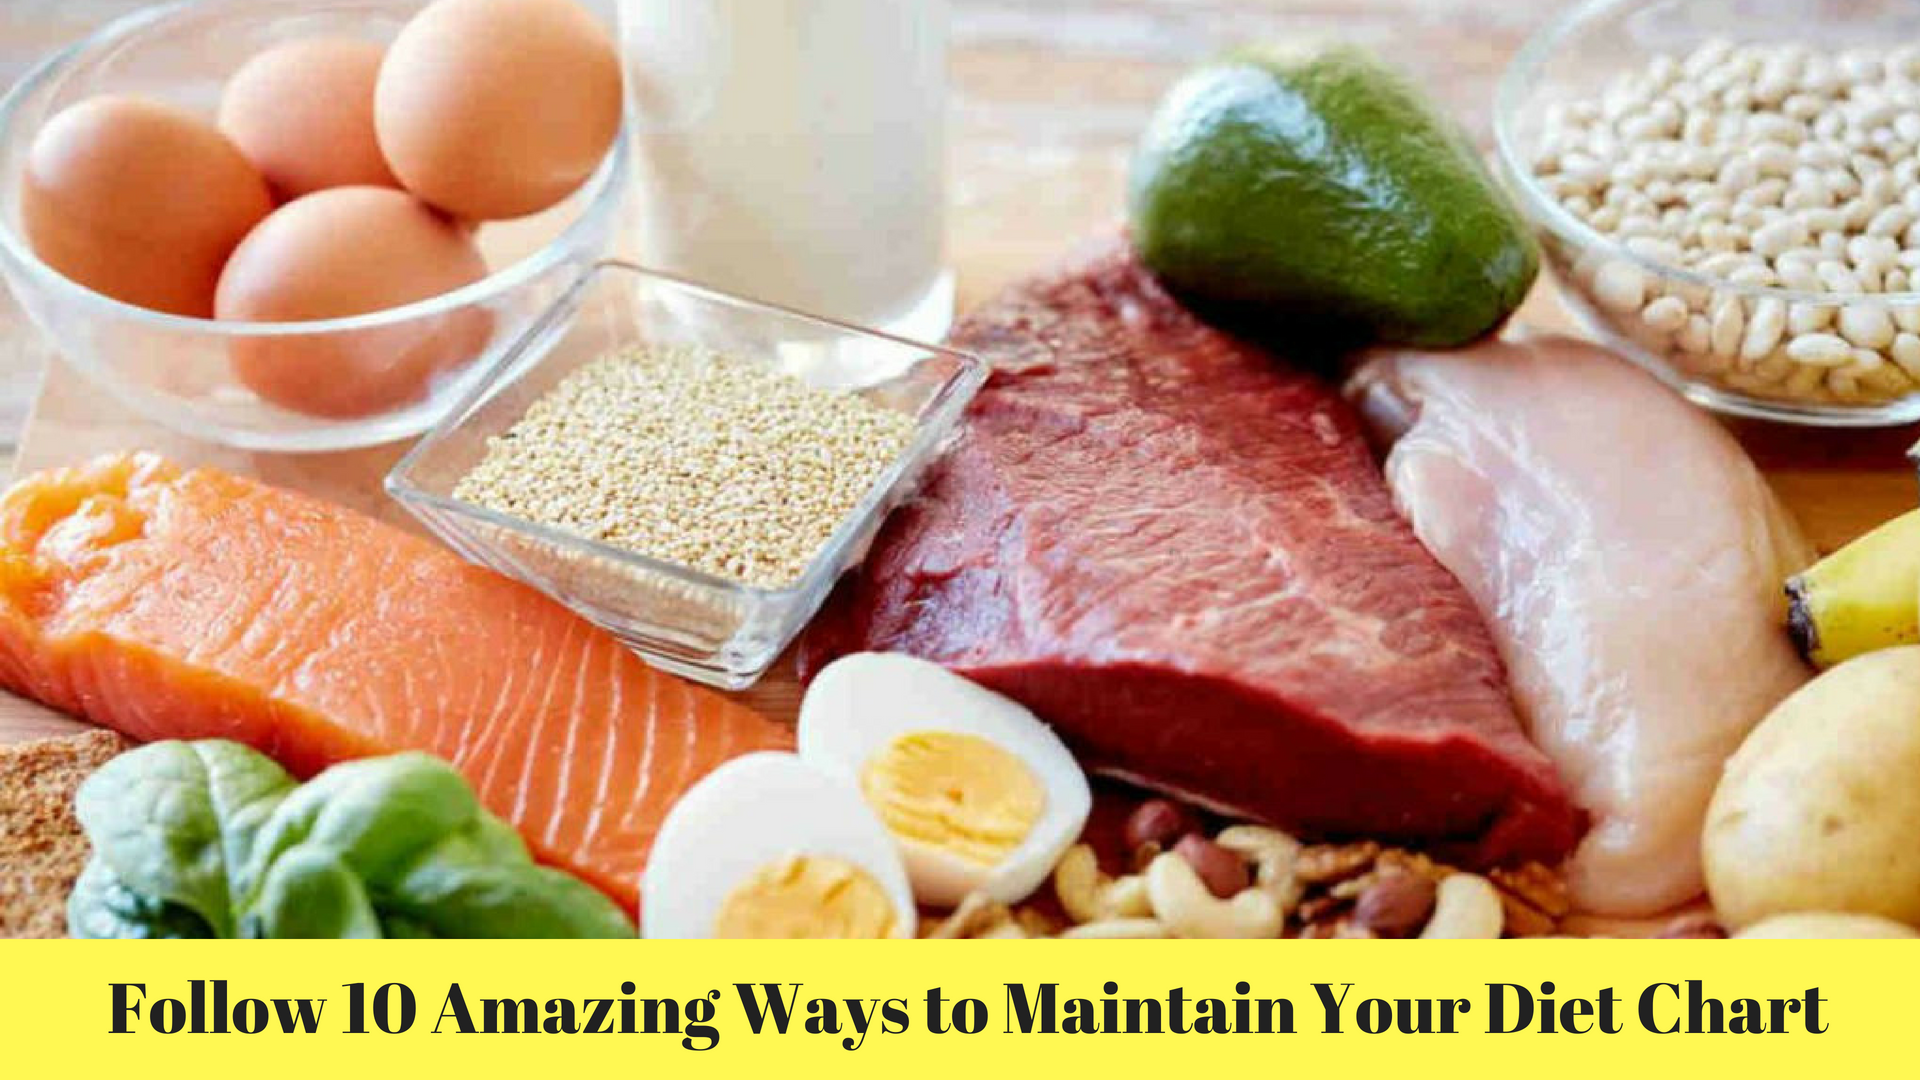 Follow 10 Amazing Ways to Maintain Your Diet Chart